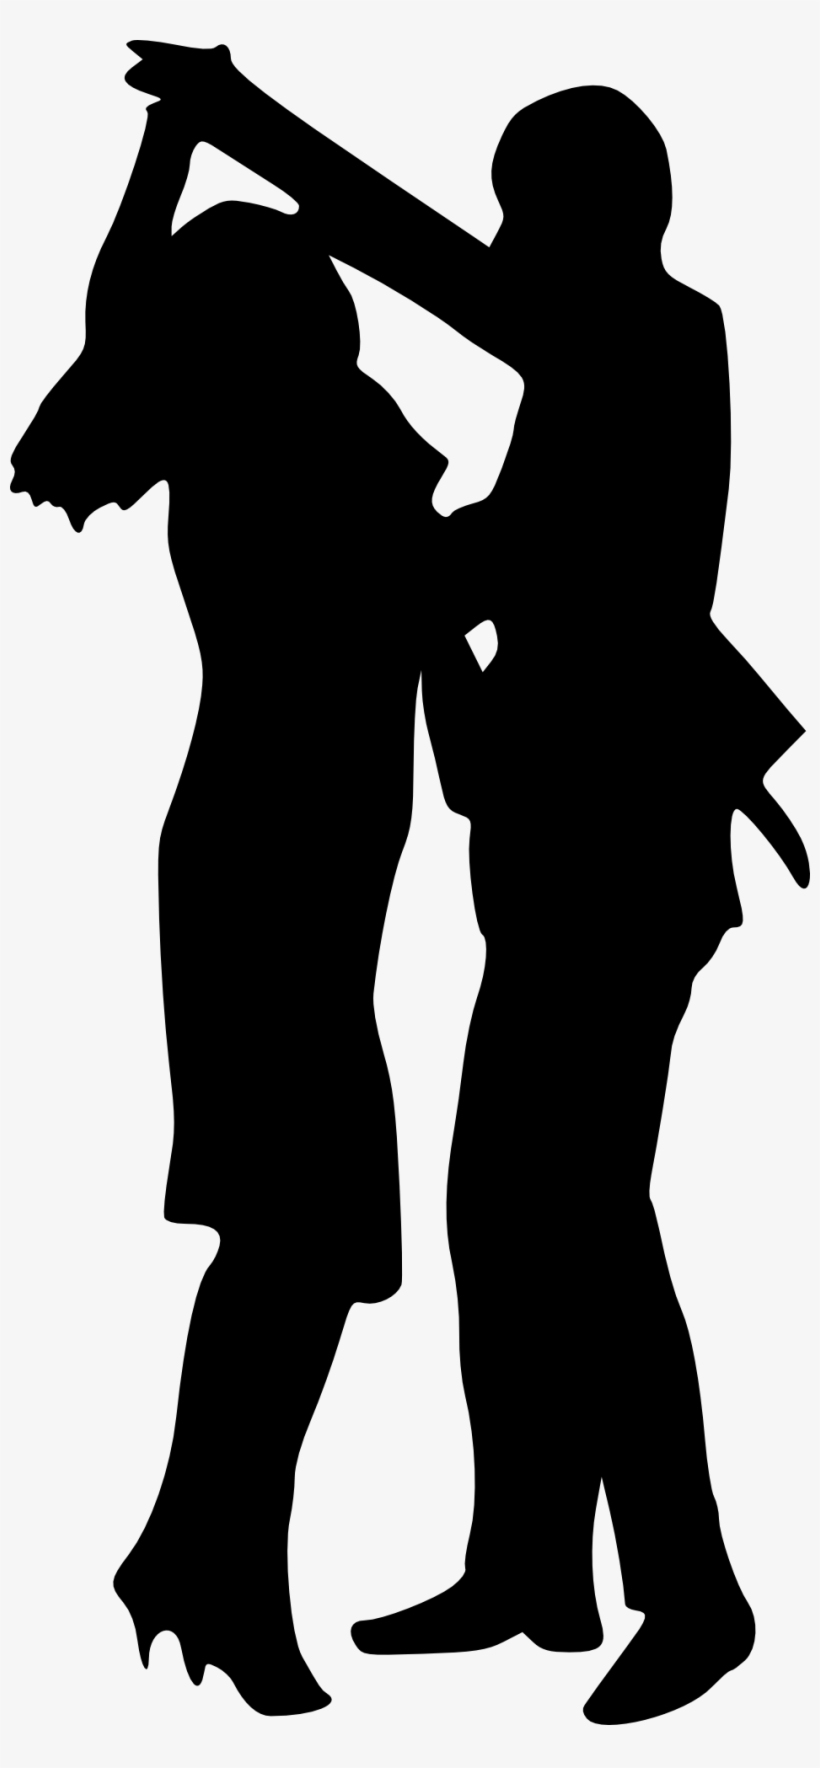 Png File Size - Couple Dancing Silhouette Png, transparent png #86615